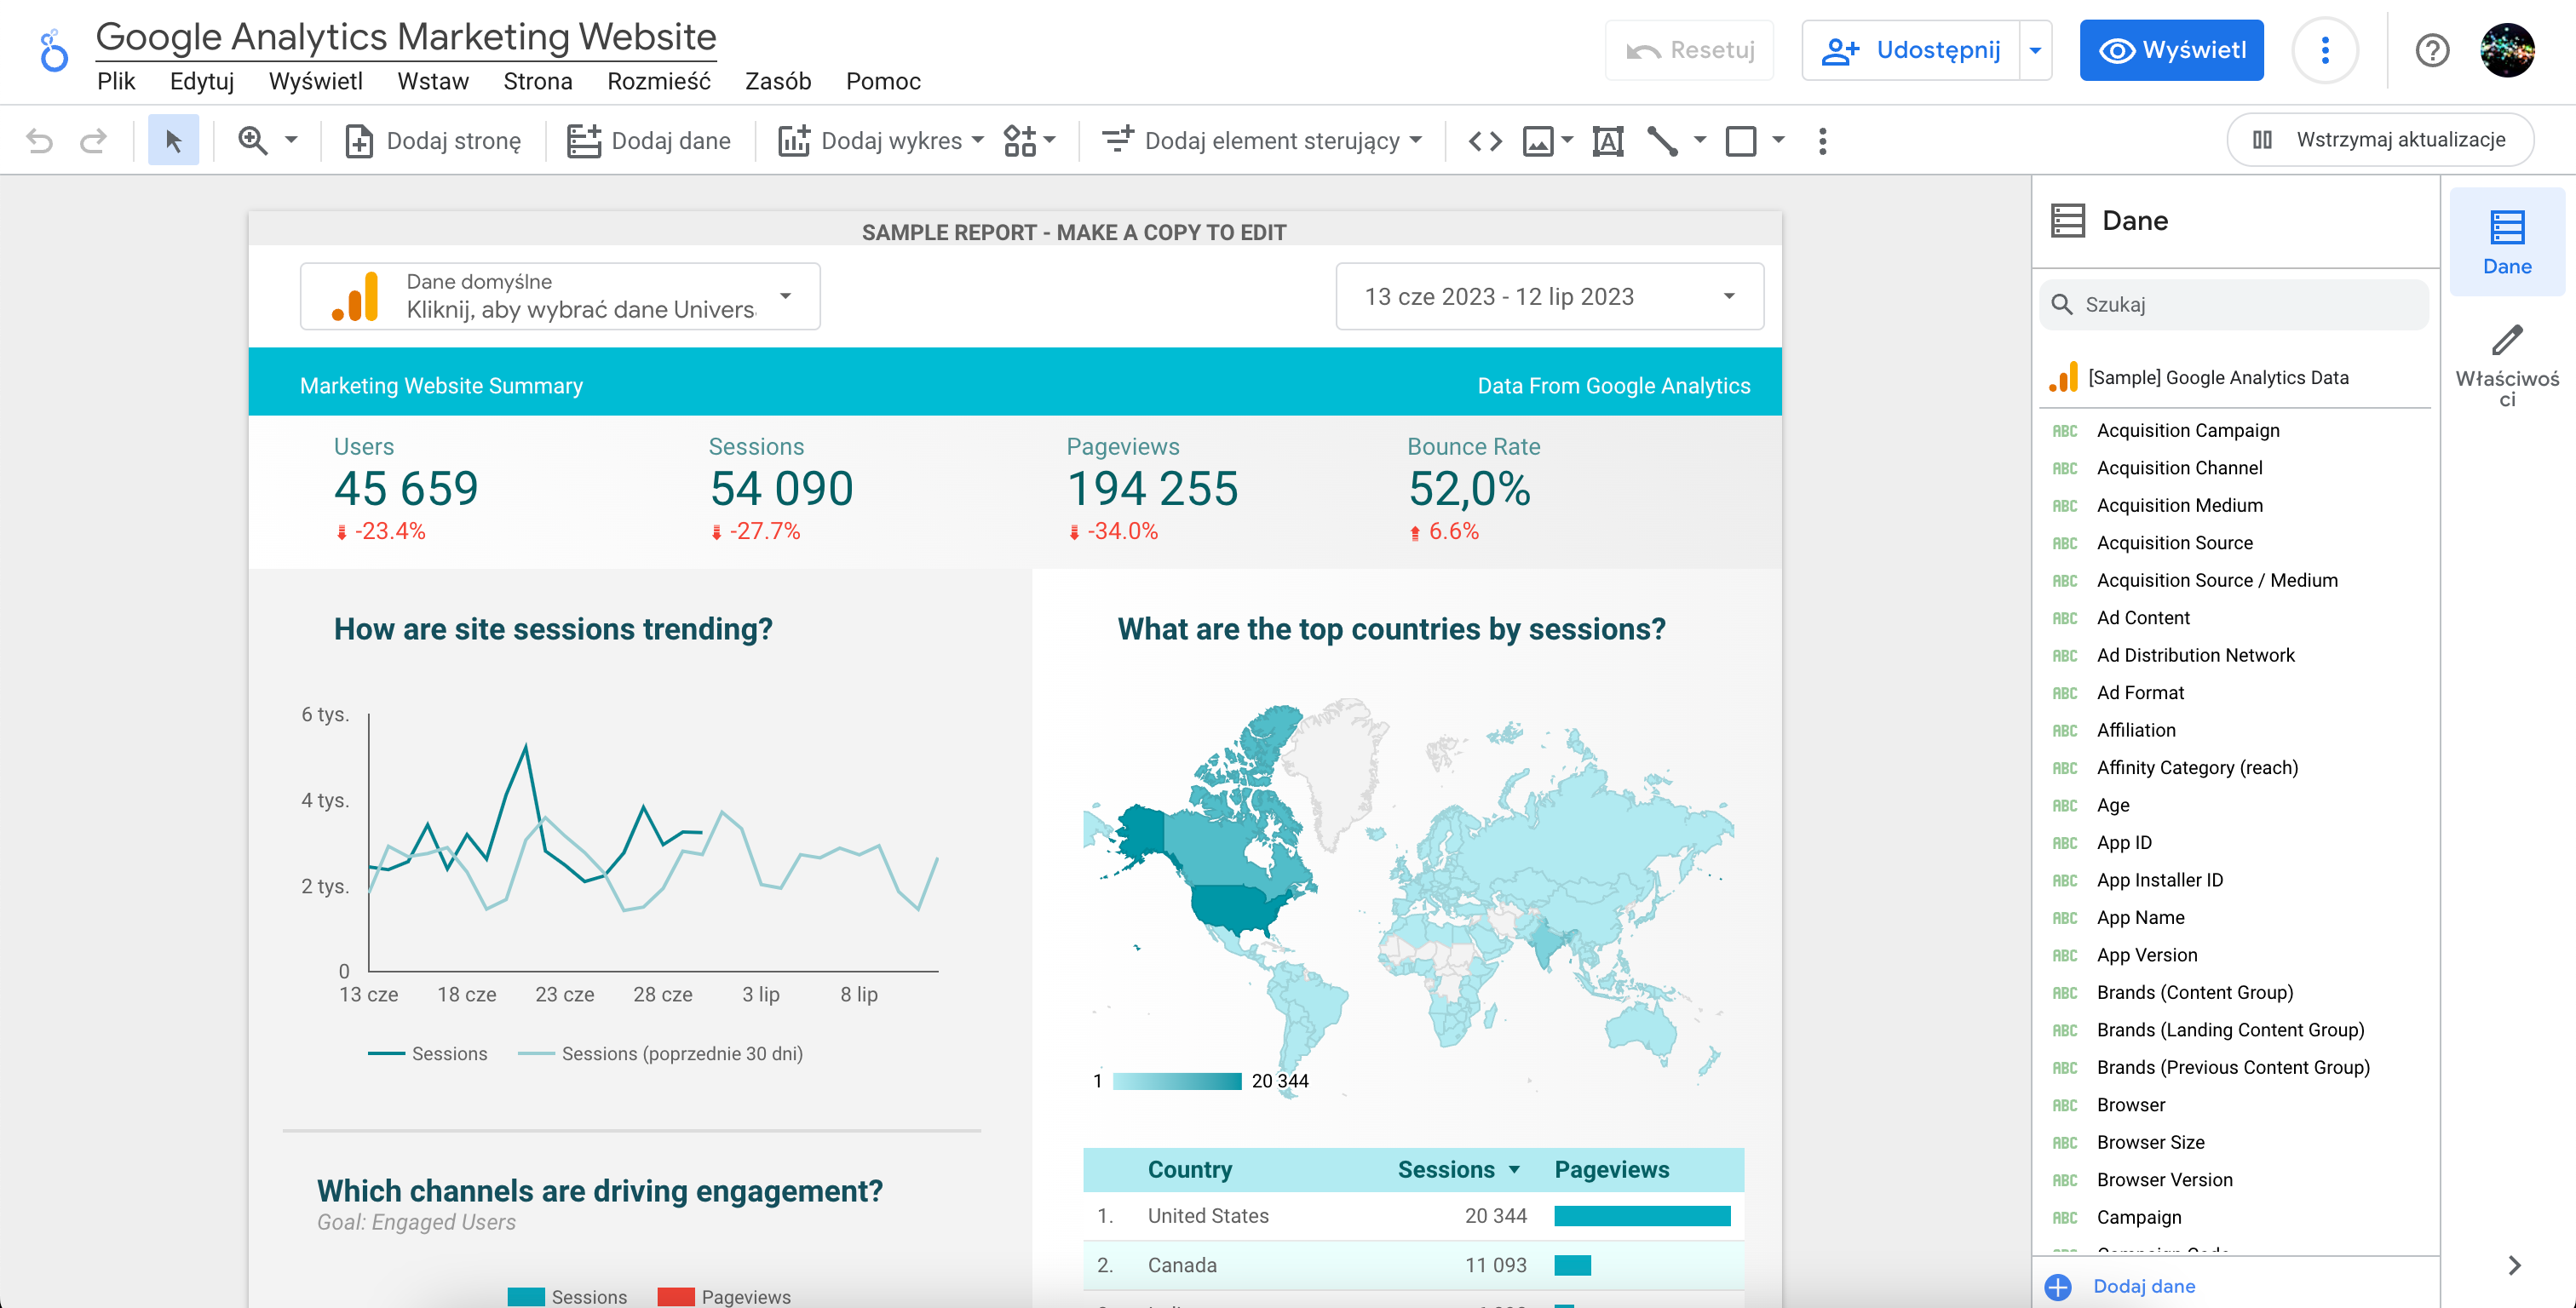 A dashboard created with Looker